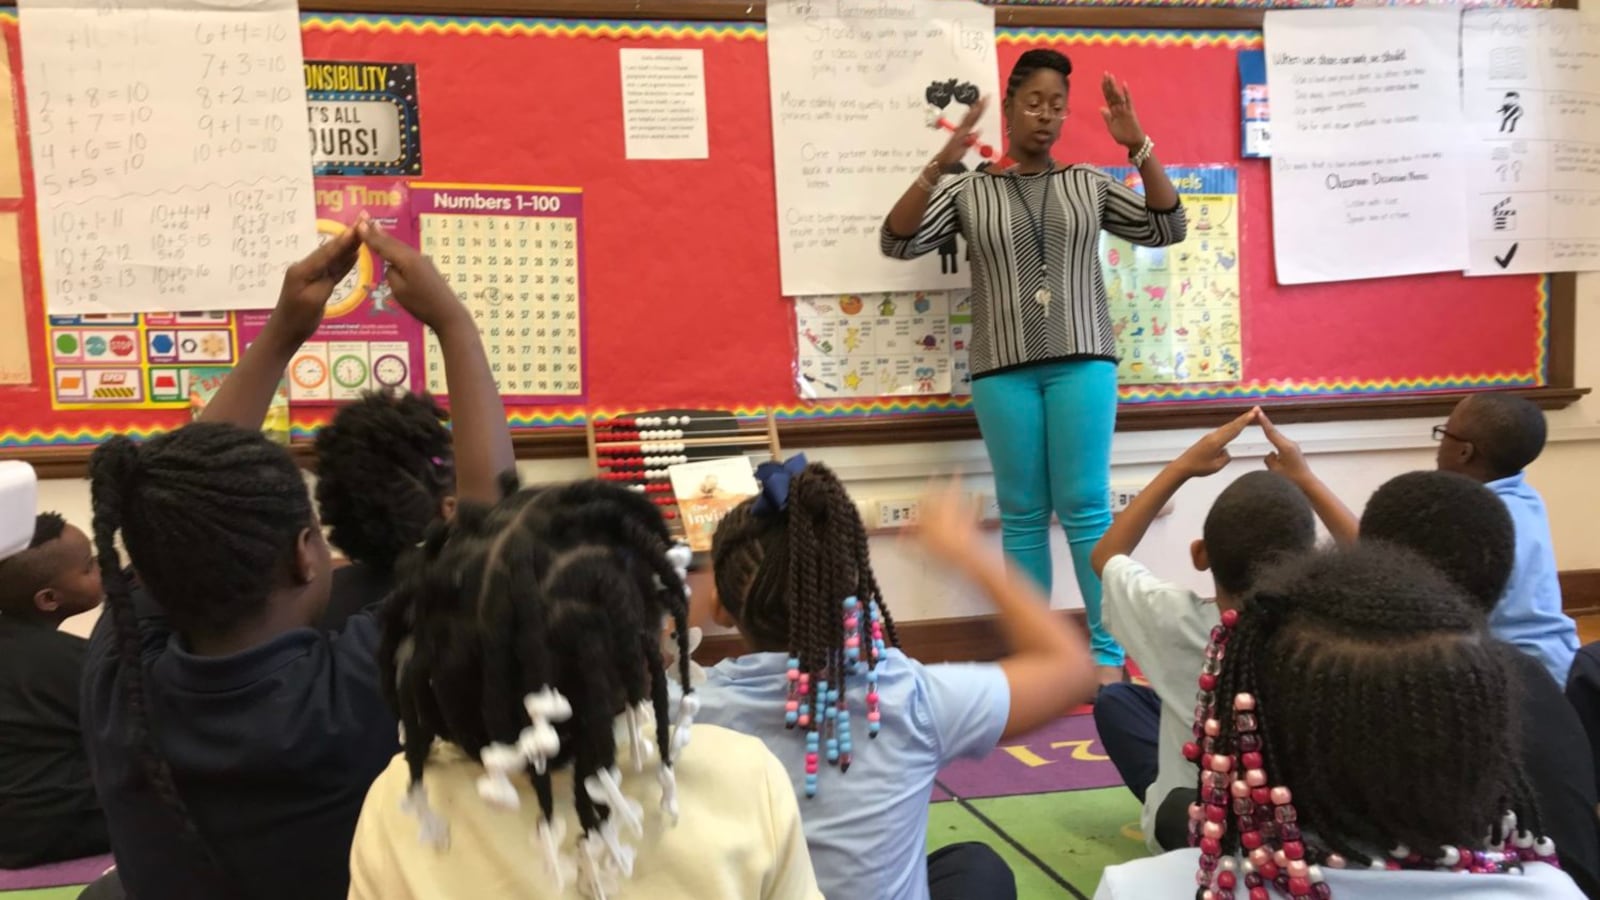 Lydia Nickleberry, a second-grade teacher at Detroit's Bethune Elementary-Middle School said teachers should be able to quickly access the records of new students. “Whatever teacher gets that child should be able to pull up what they did,” she said. “They shouldn't have to search that down.”